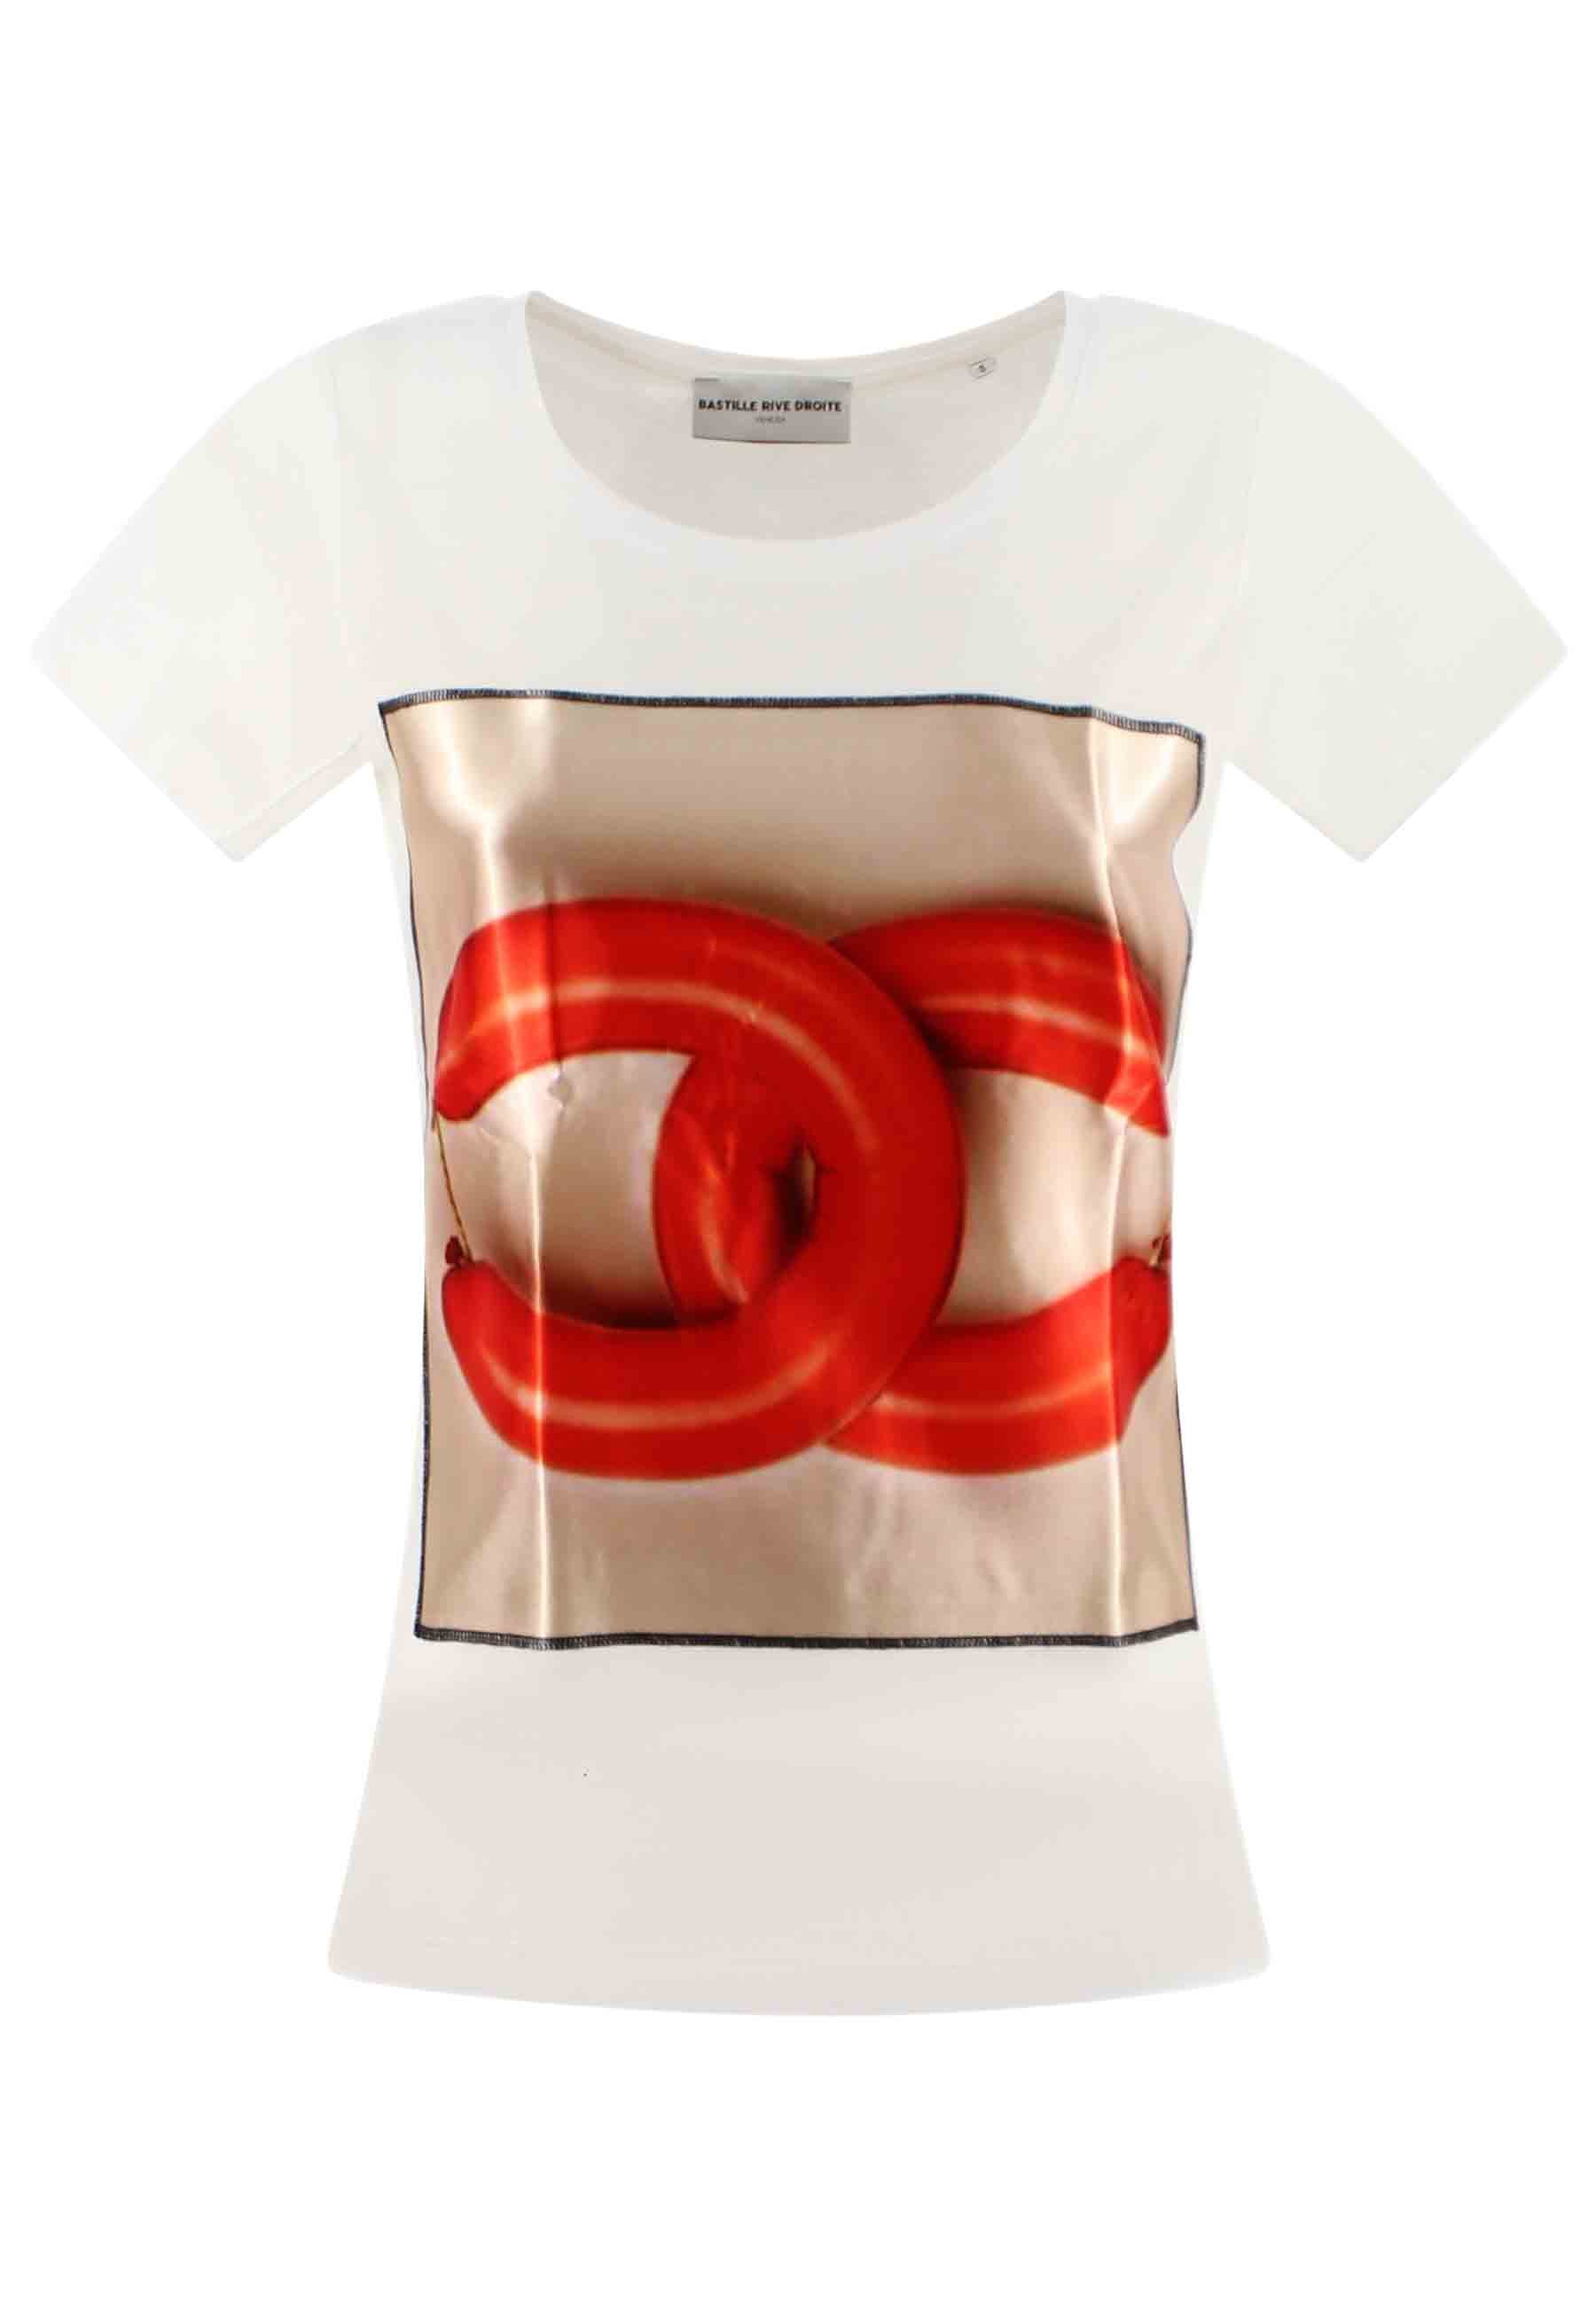 Savage women's t-shirt in white cotton with silk print